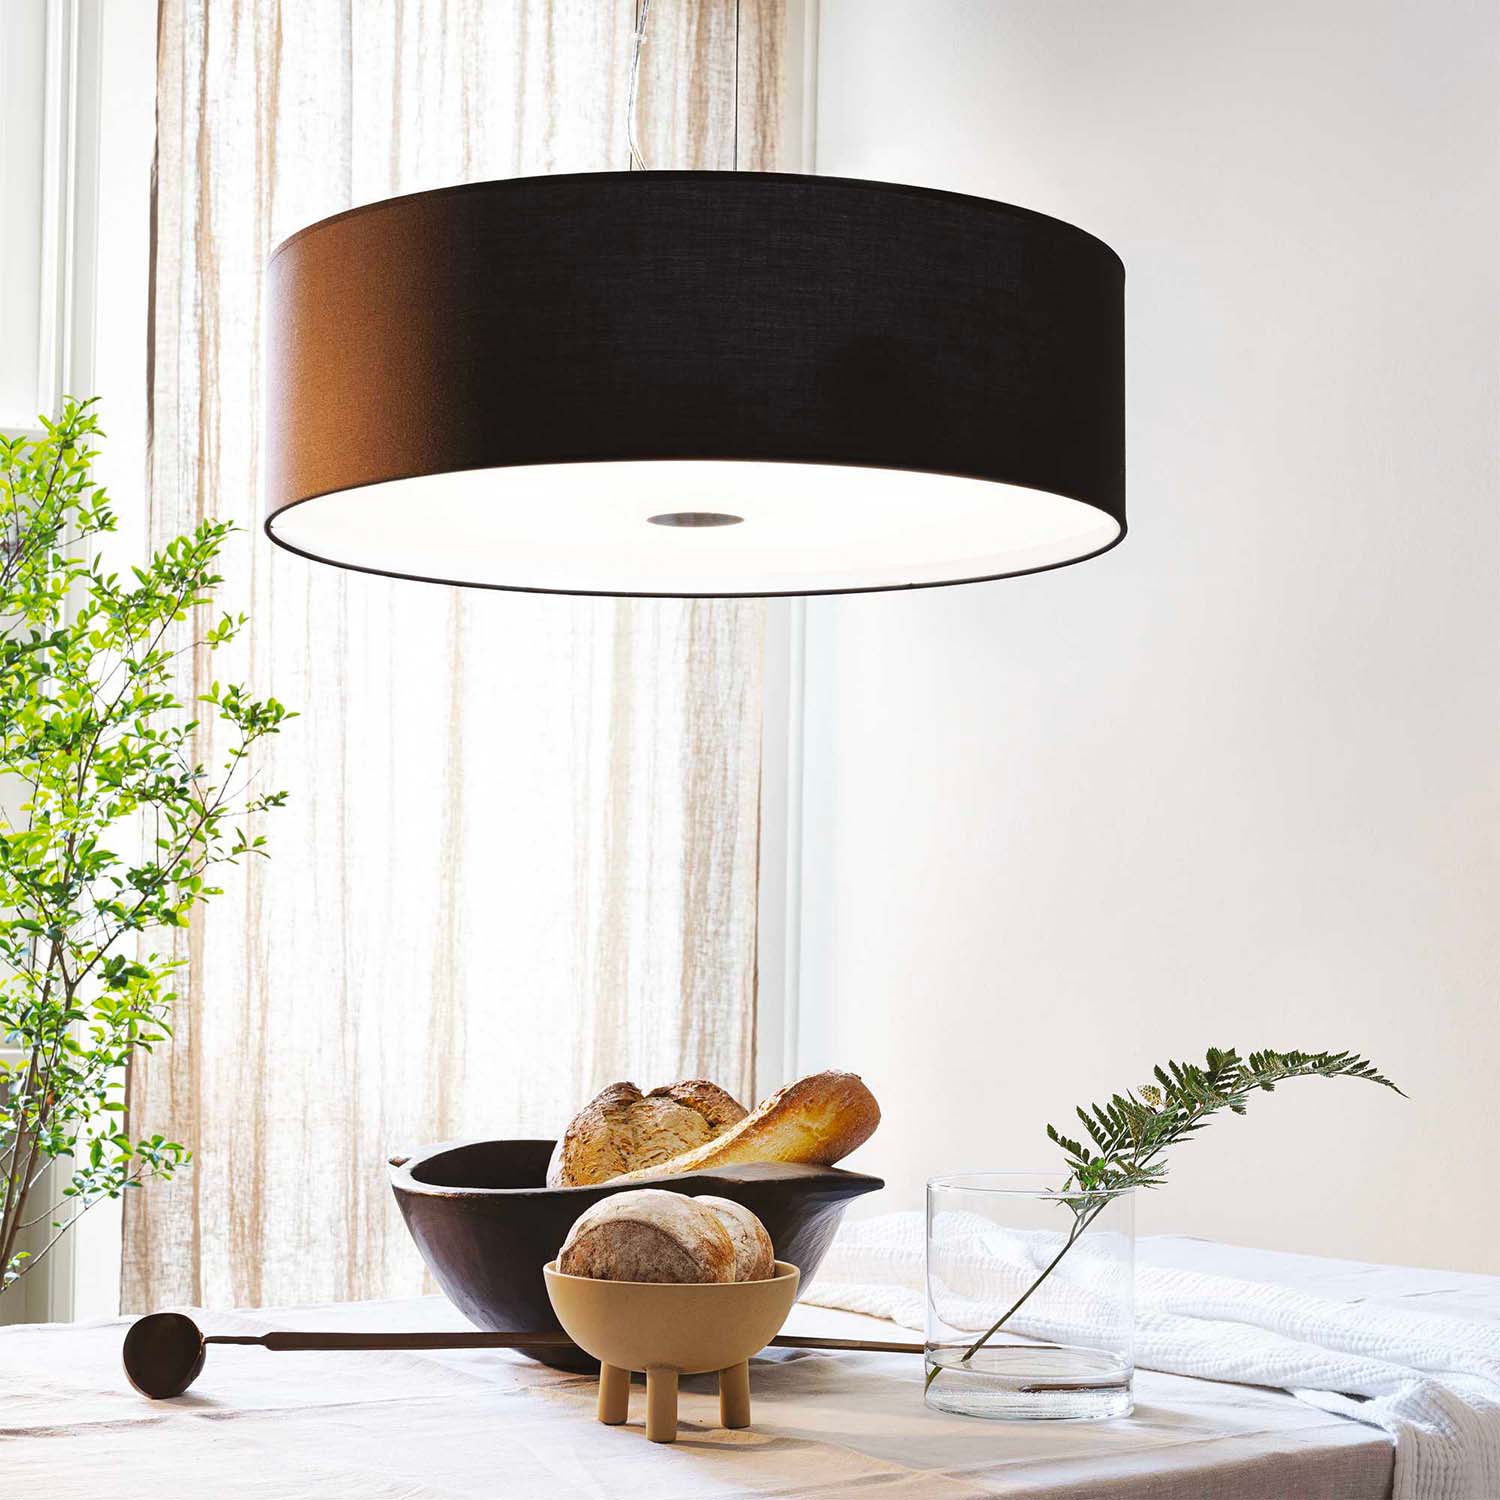 WOODY - Round chandelier in black or white fabric